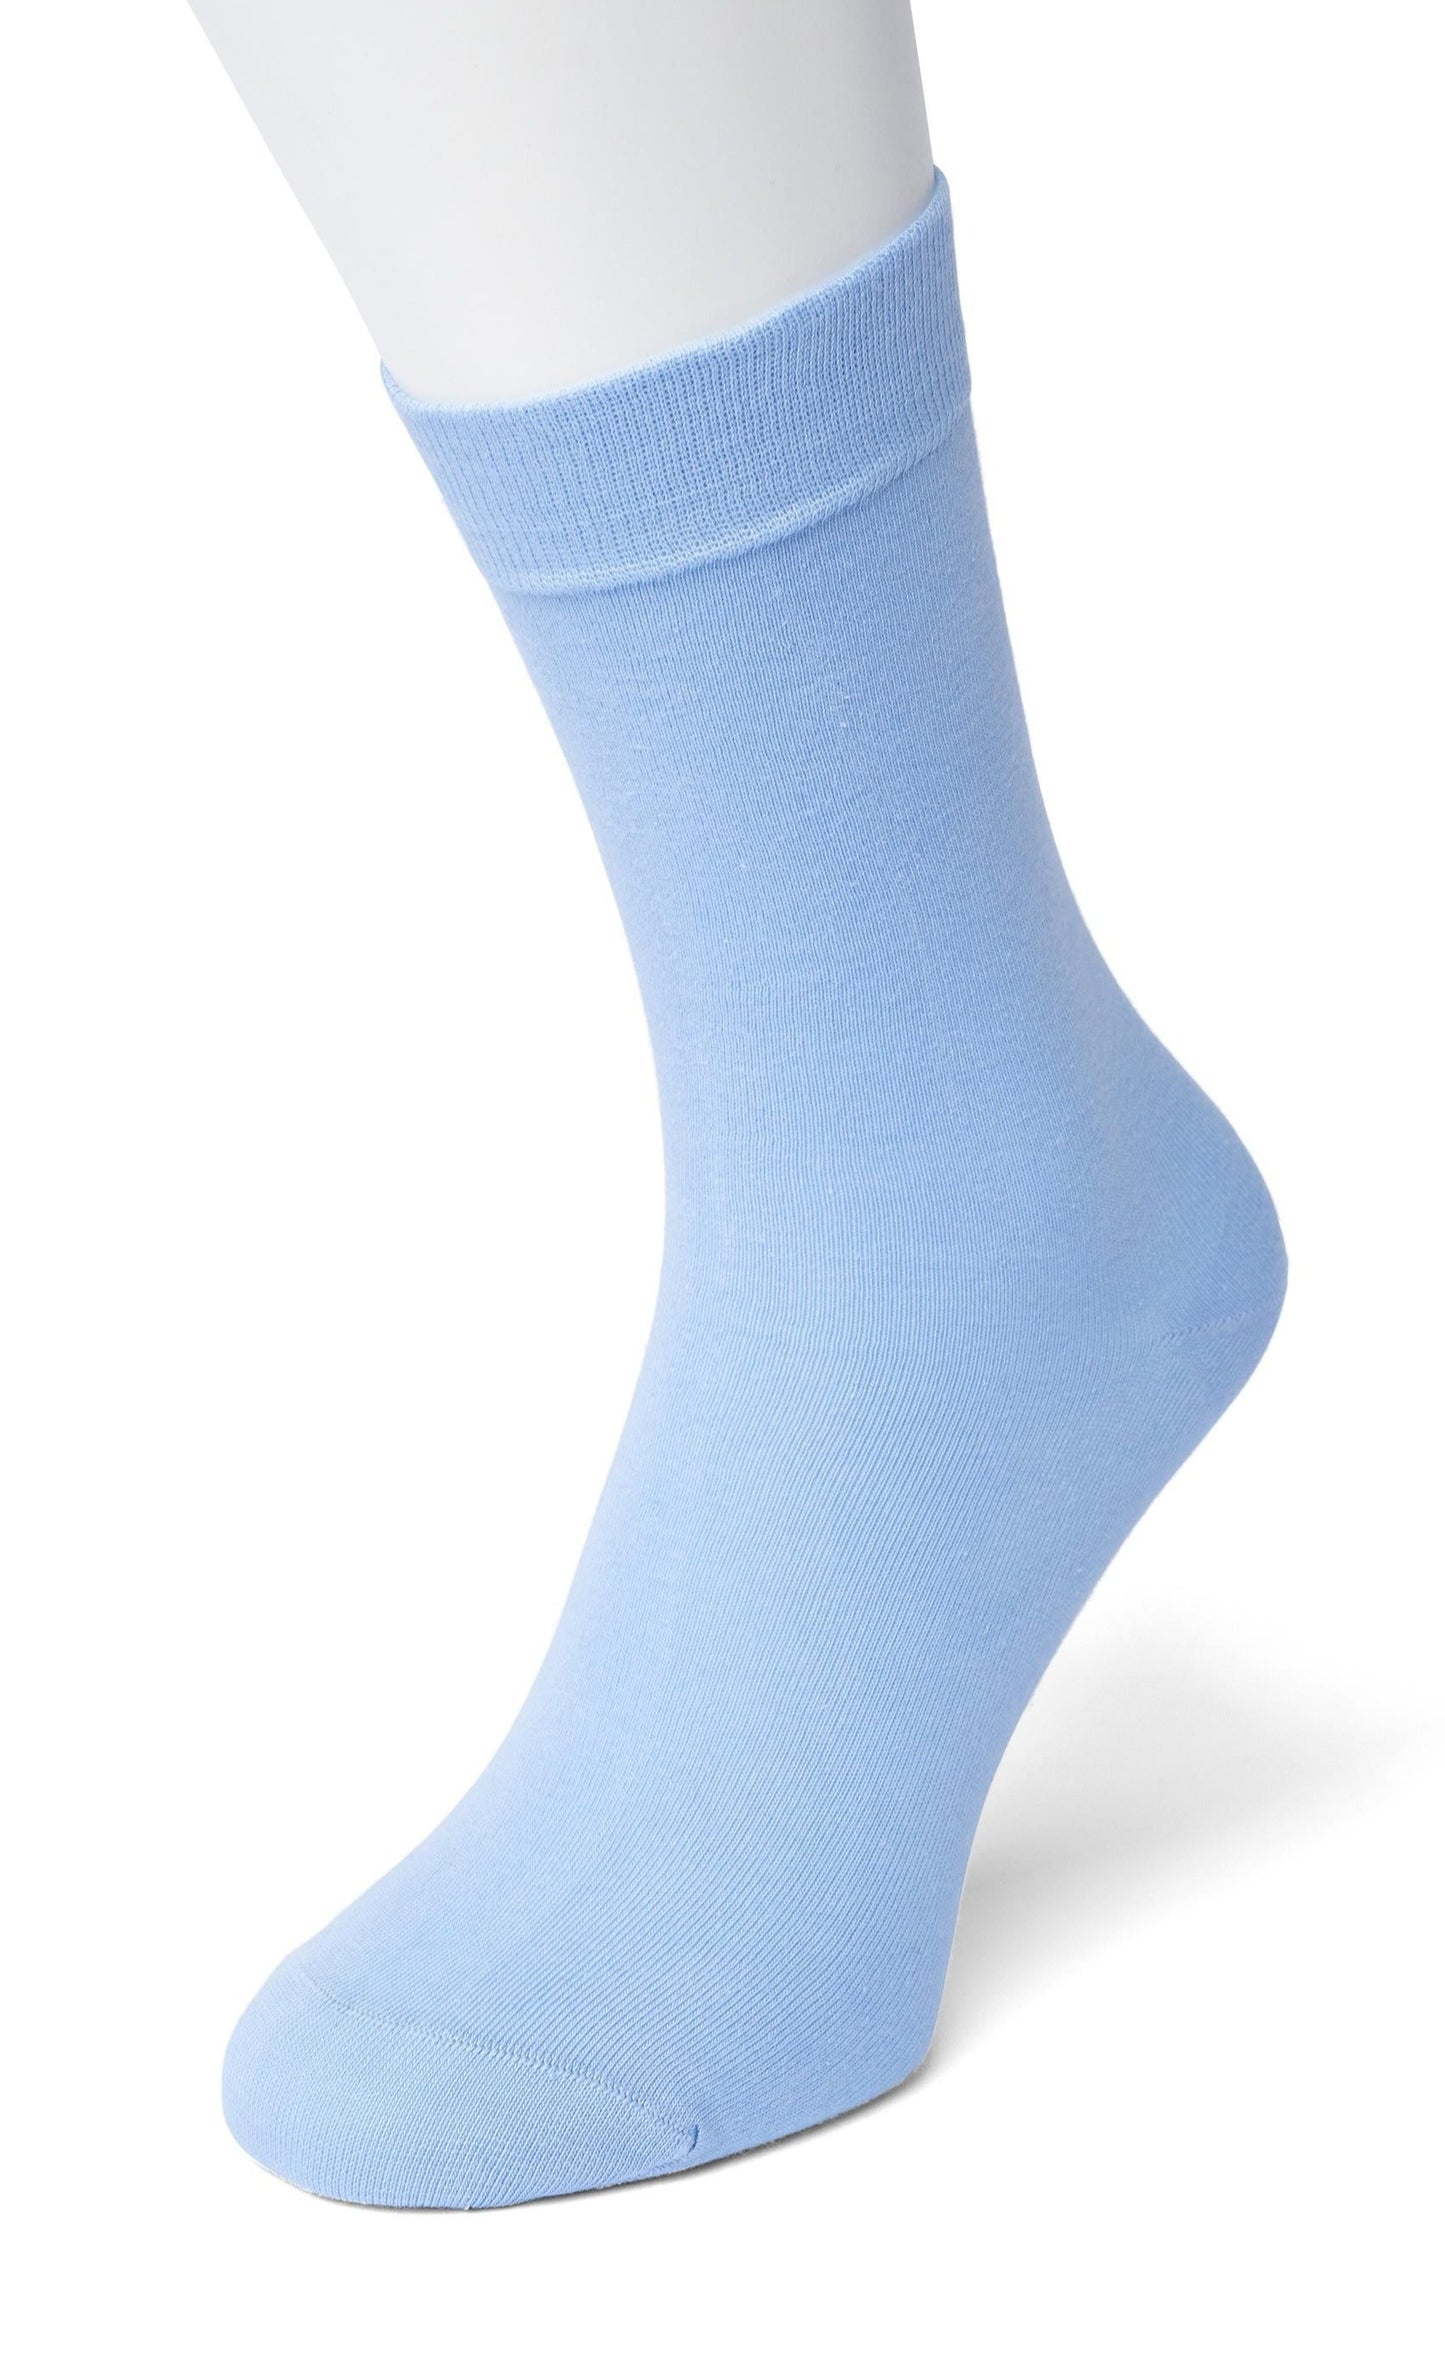 Bonnie Doon 83422 Cotton Sock - Light pastel blue ankle socks available in women sizes